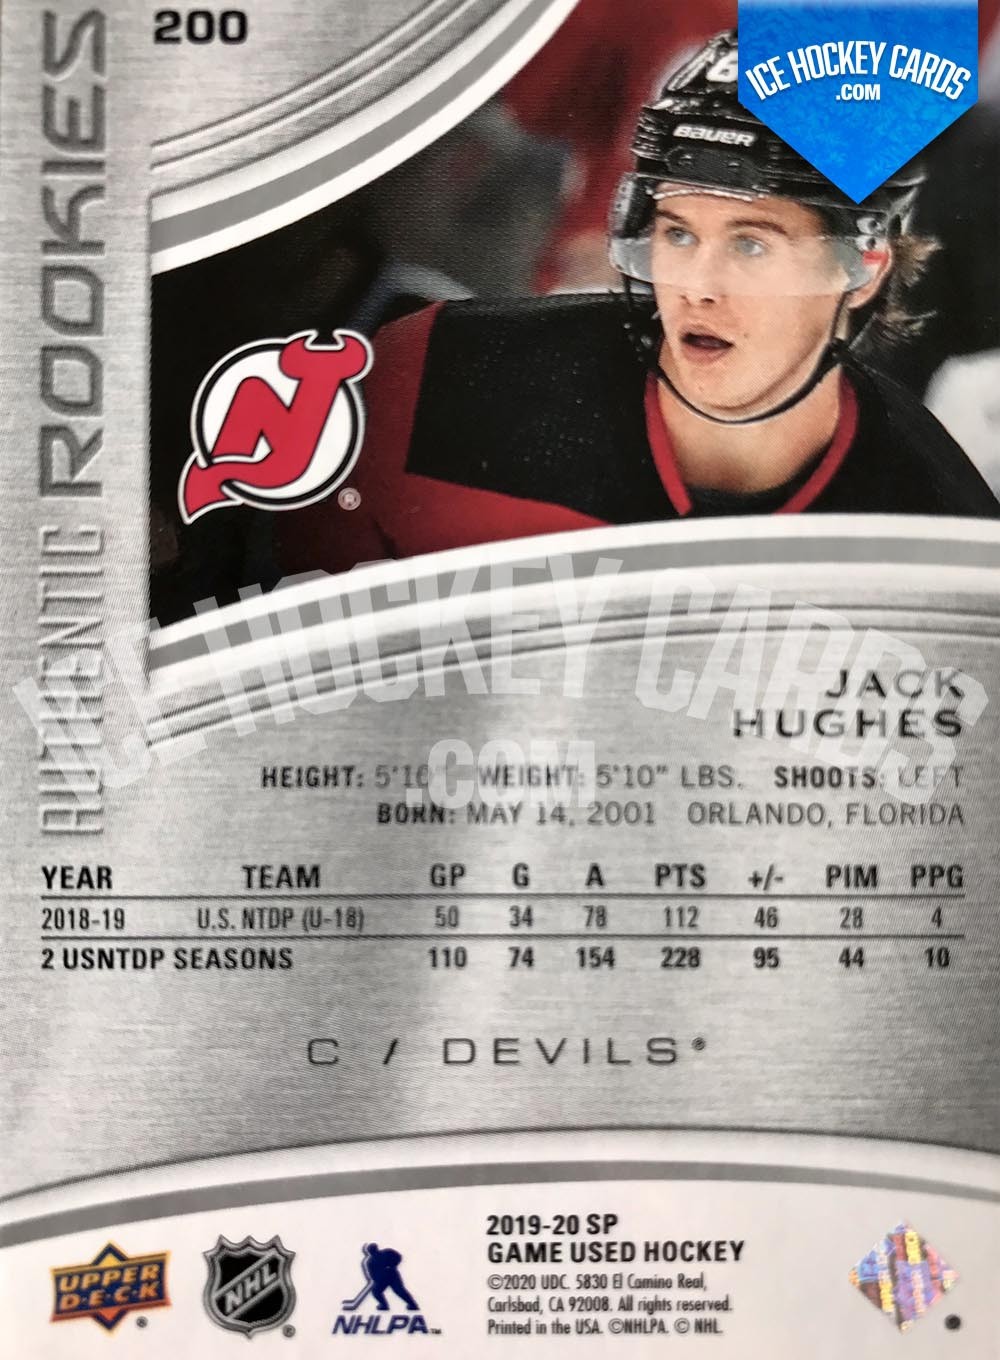 Upper Deck - SP Game Used 2019-20 - Jack Hughes Authentic Rookies RC Base back